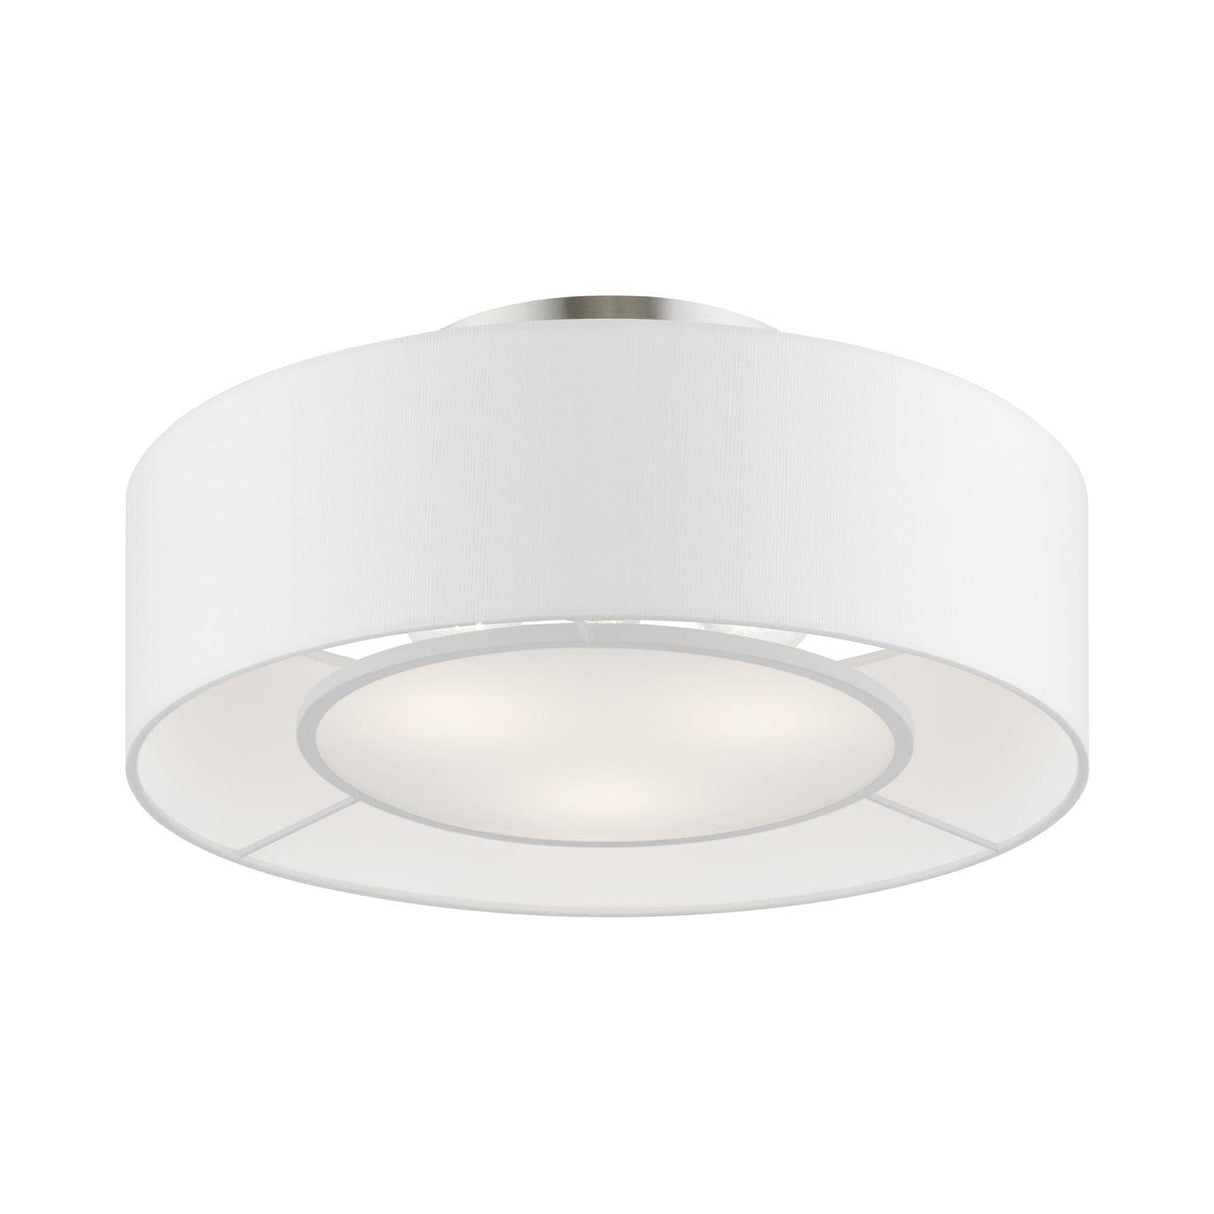 Gilmore 3 Light Semi-Flush in Brushed Nickel with Shiny White (47173-91)